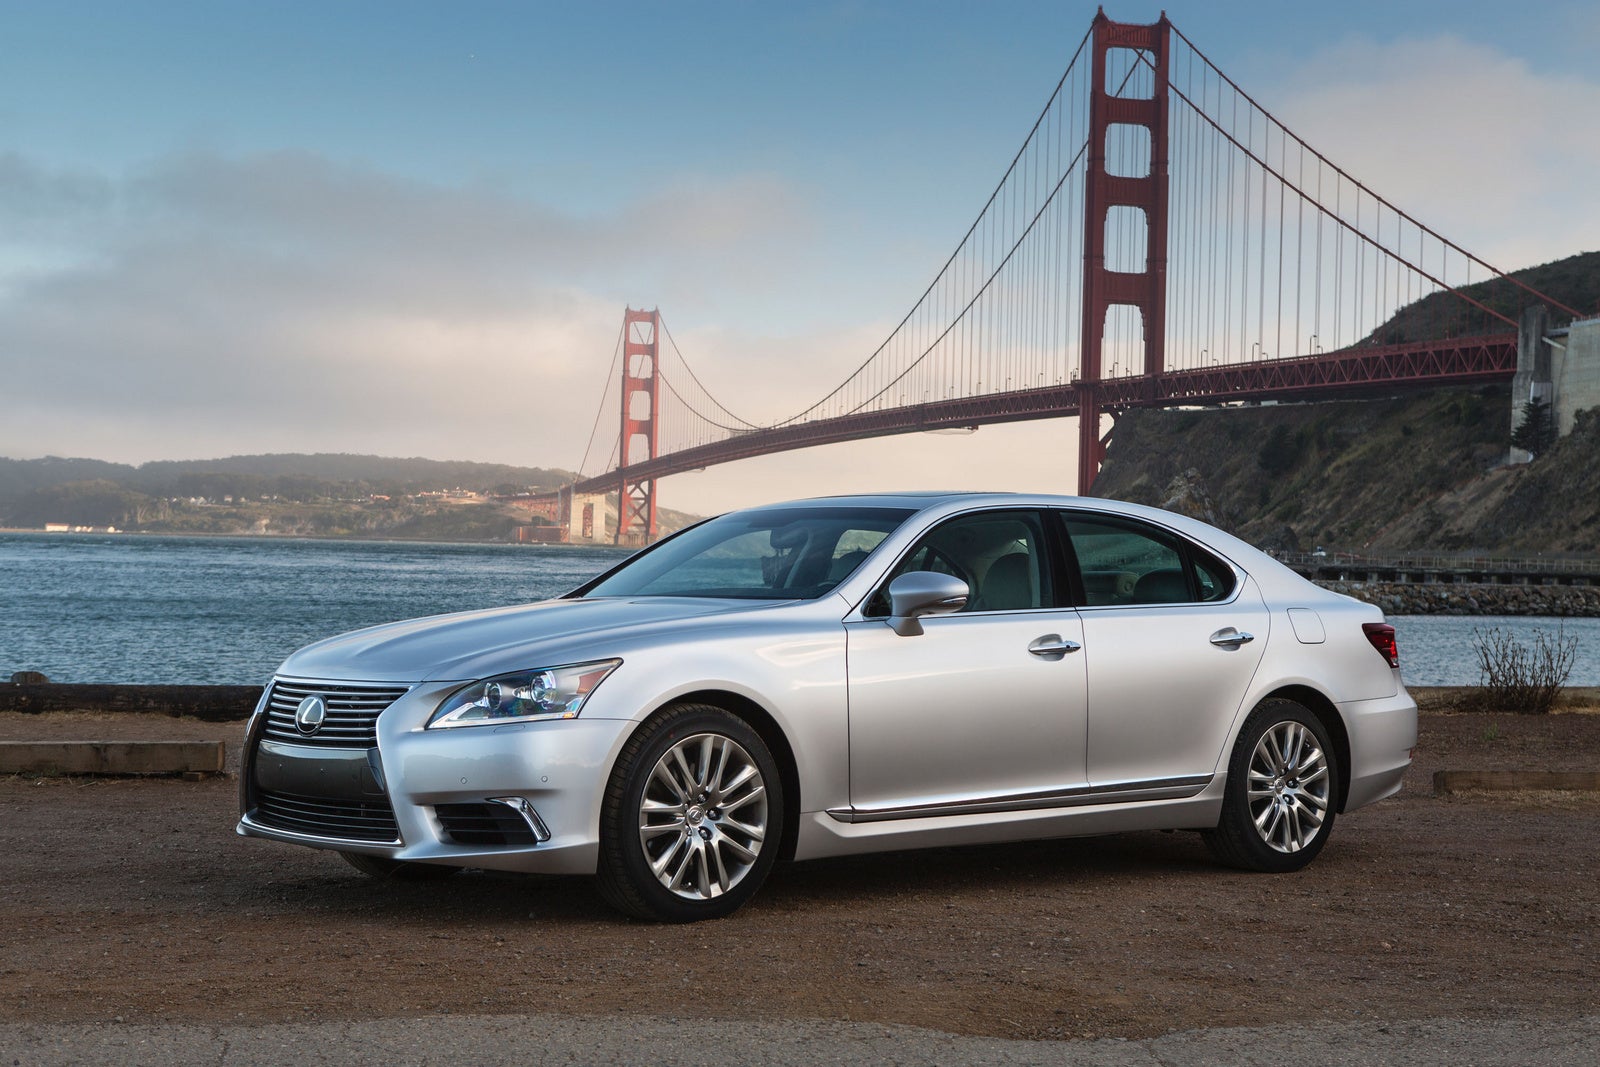 Used 2013 Lexus LS 460 for Sale (with Photos) CarGurus